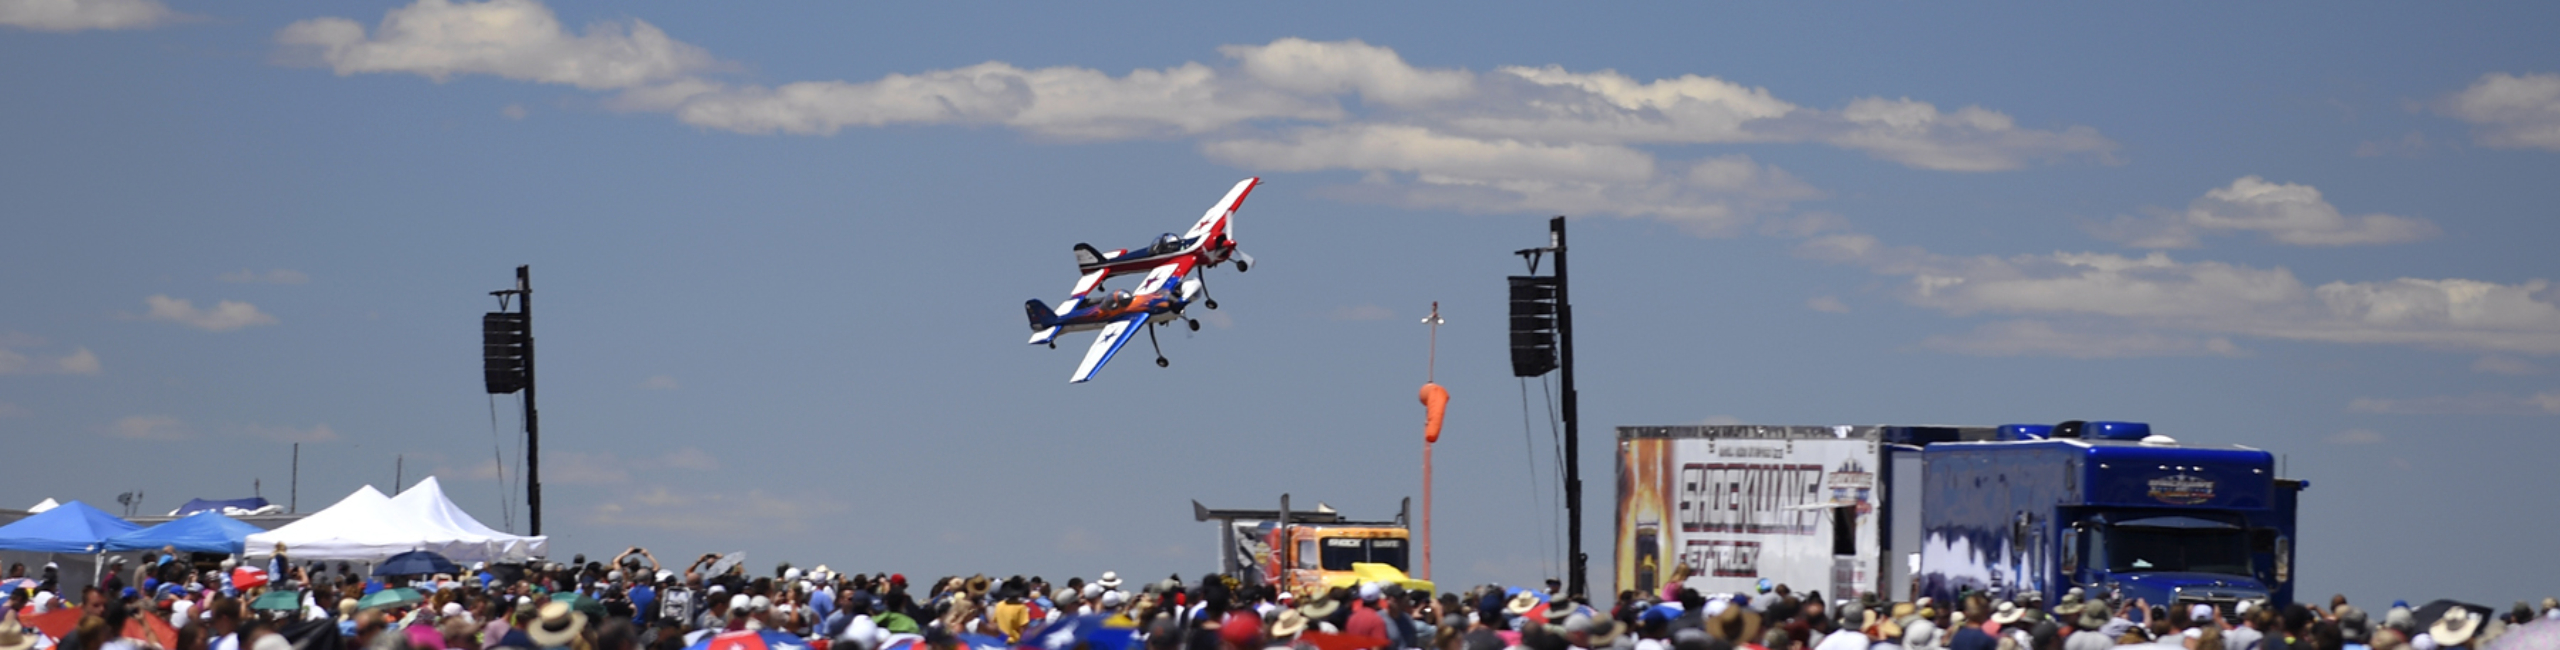 The Utah Air Show Warriors Over The Wasatch